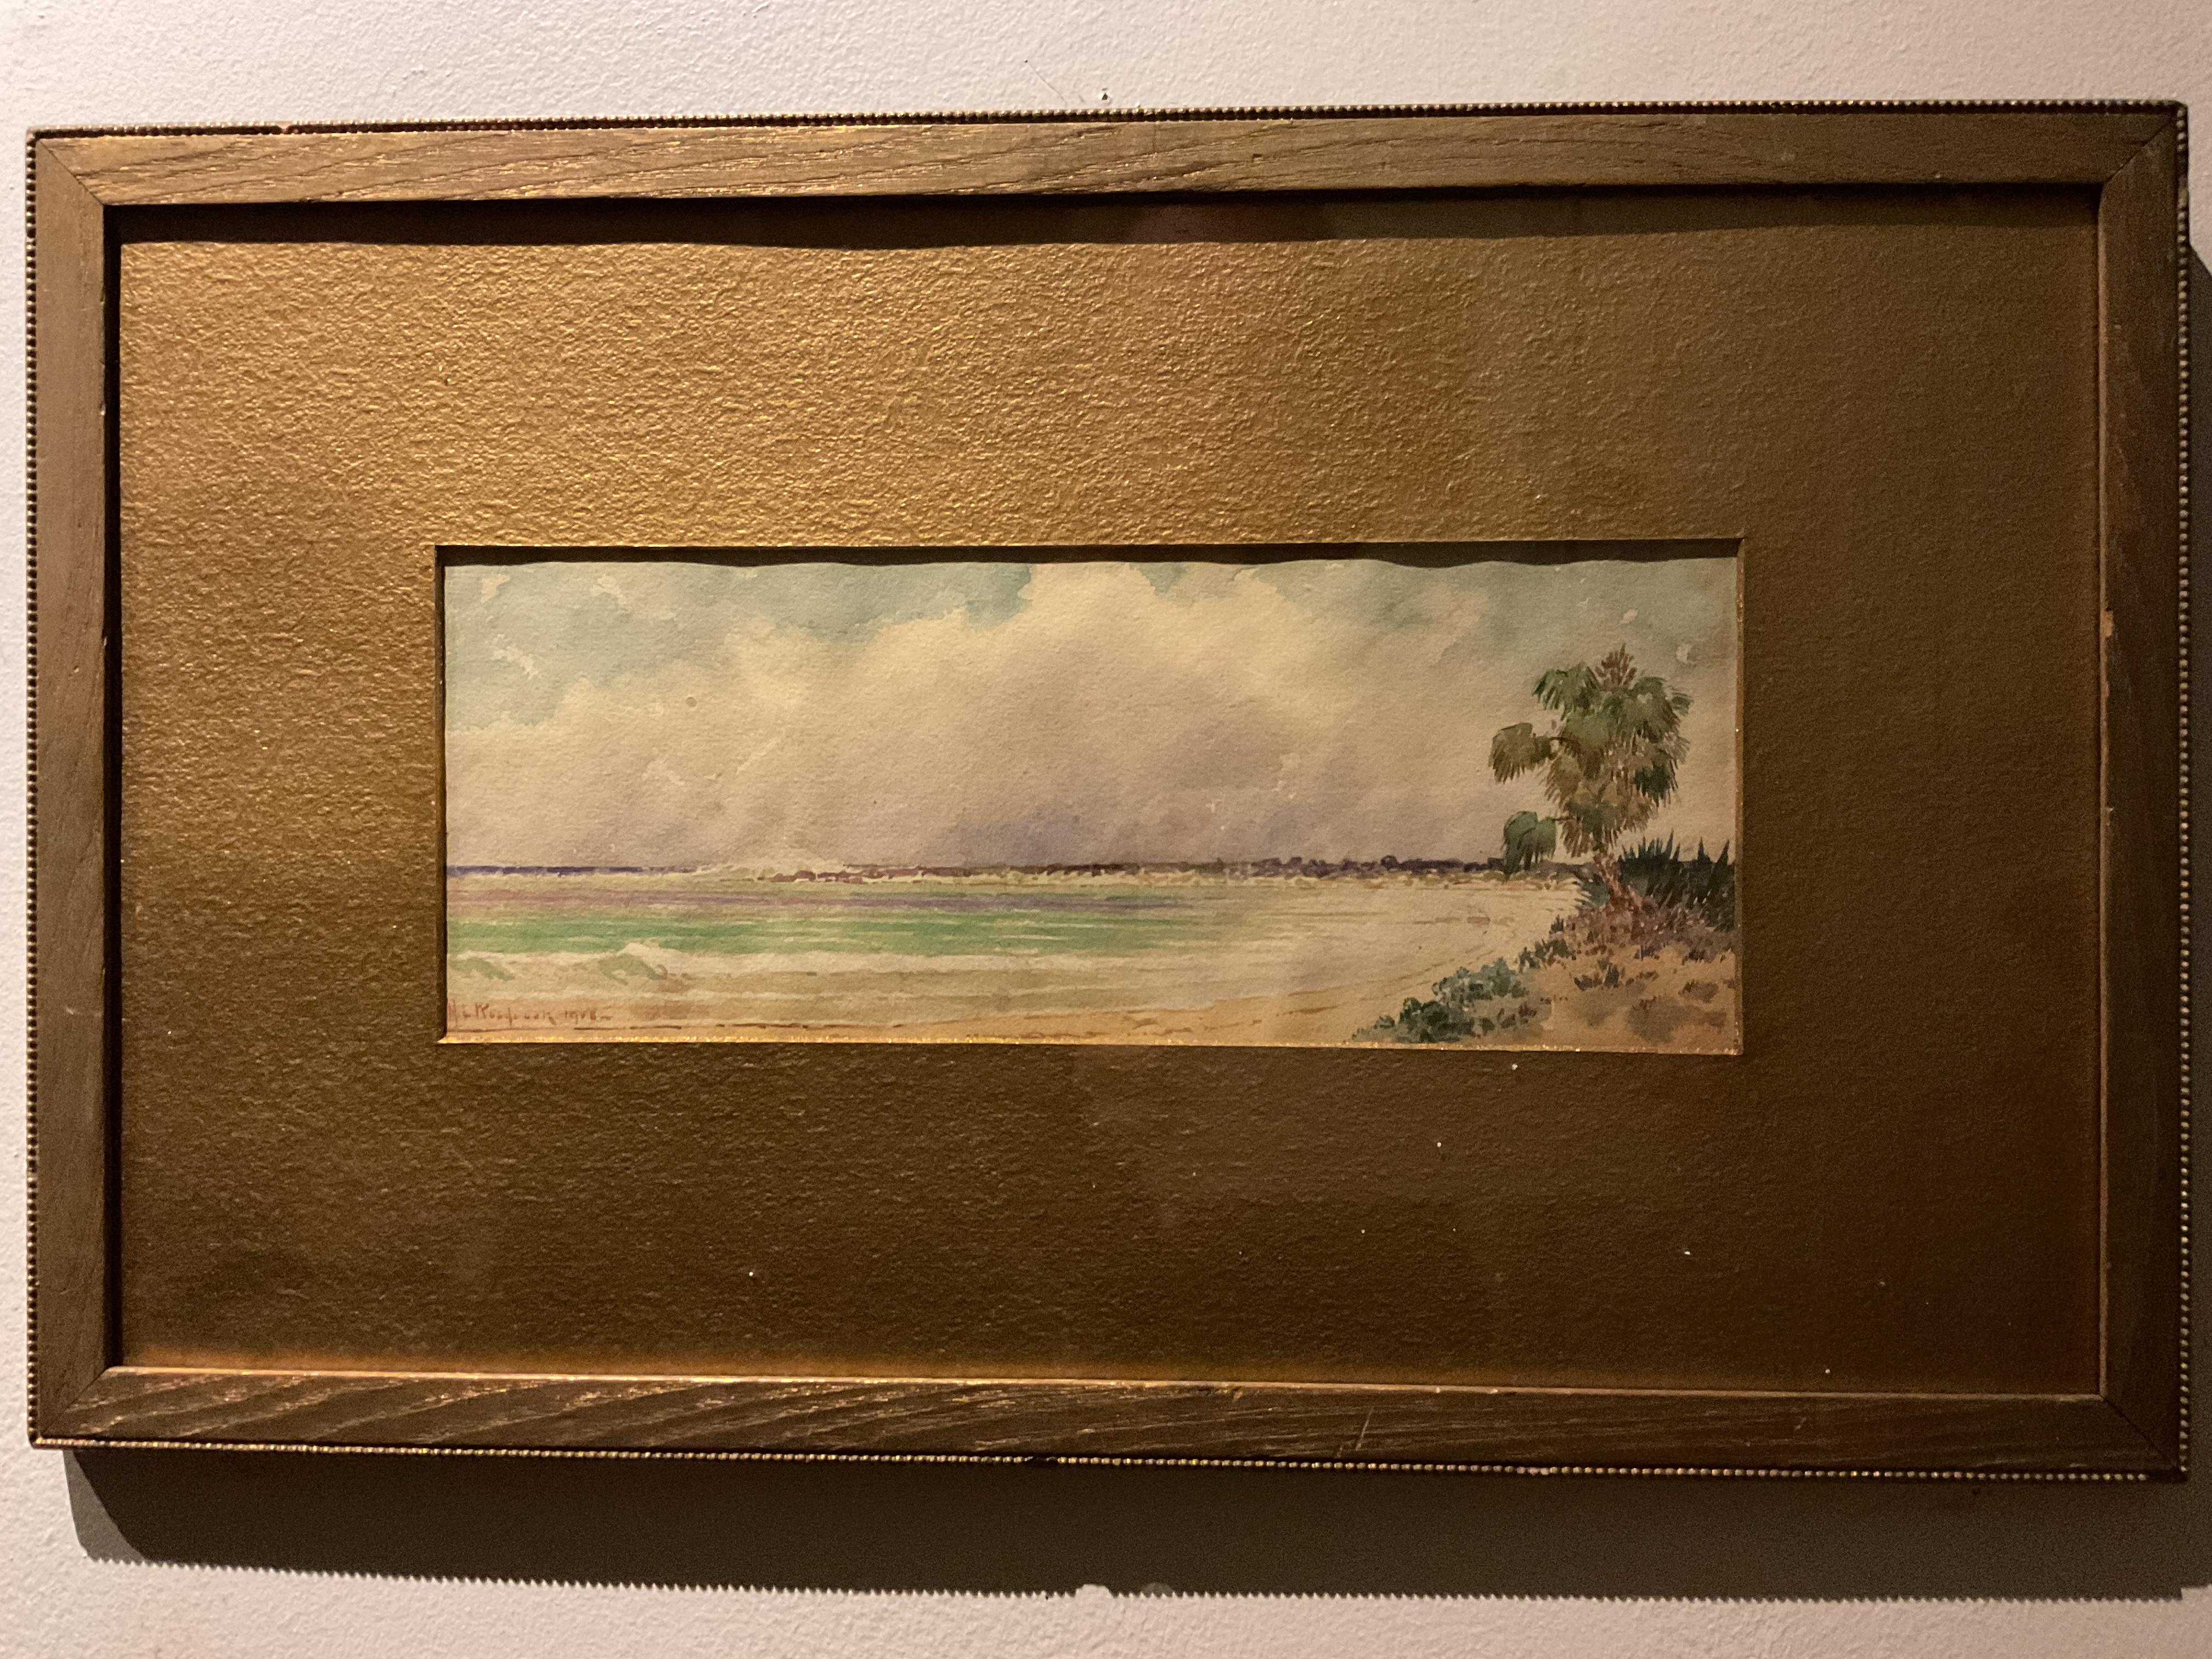 This small watercolor by well known and listed artist Hartwell Leon Woodcock is most likely a scene in the Bahamas.  Woodcock was born in Maine in 1853 and spent most of his life there, painting the New England coast and the Bahamas.  Woodcock was